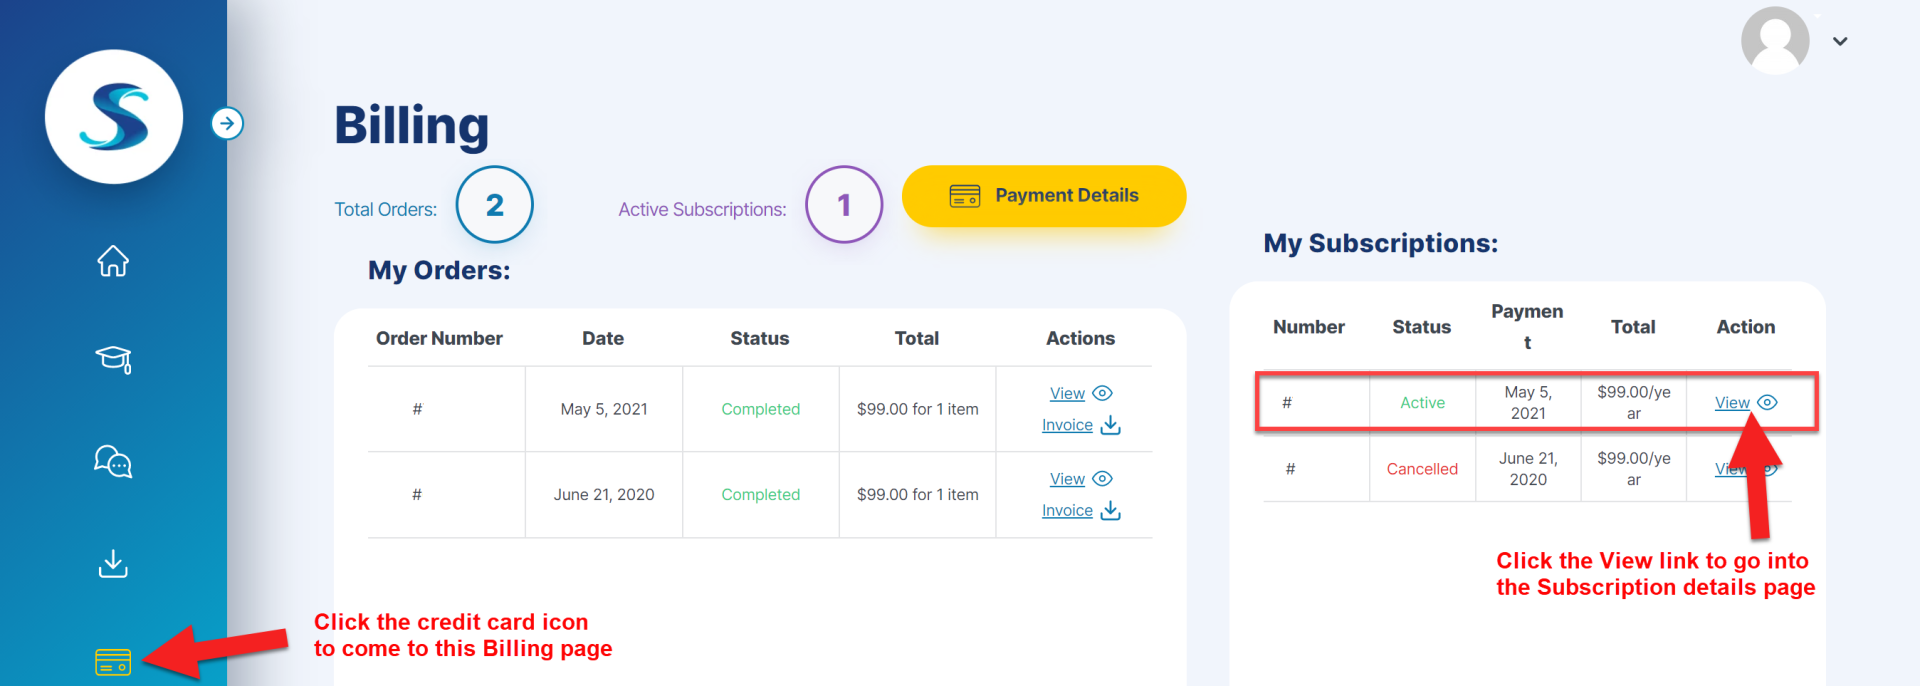 My Subscription area of the Billing page on user Dashboard